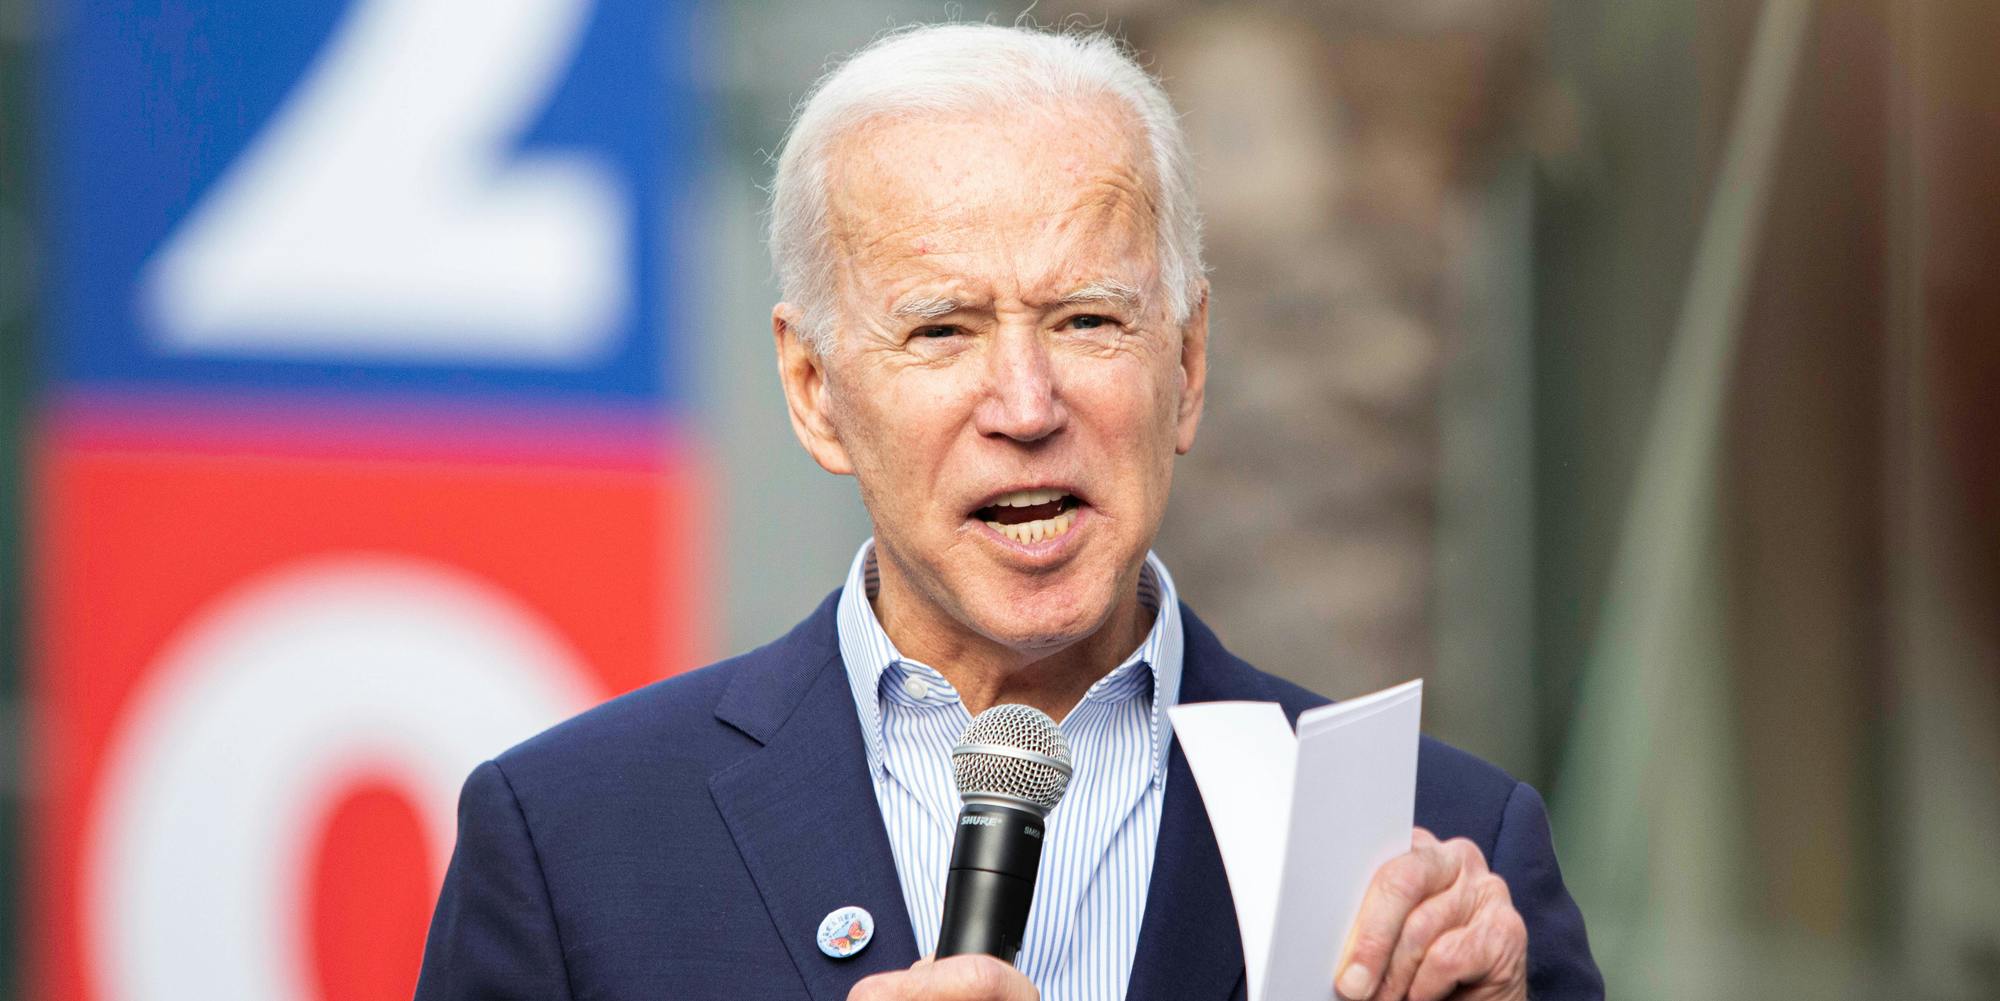 Joe Biden speaking into microphone and holding paper in front of blurred background